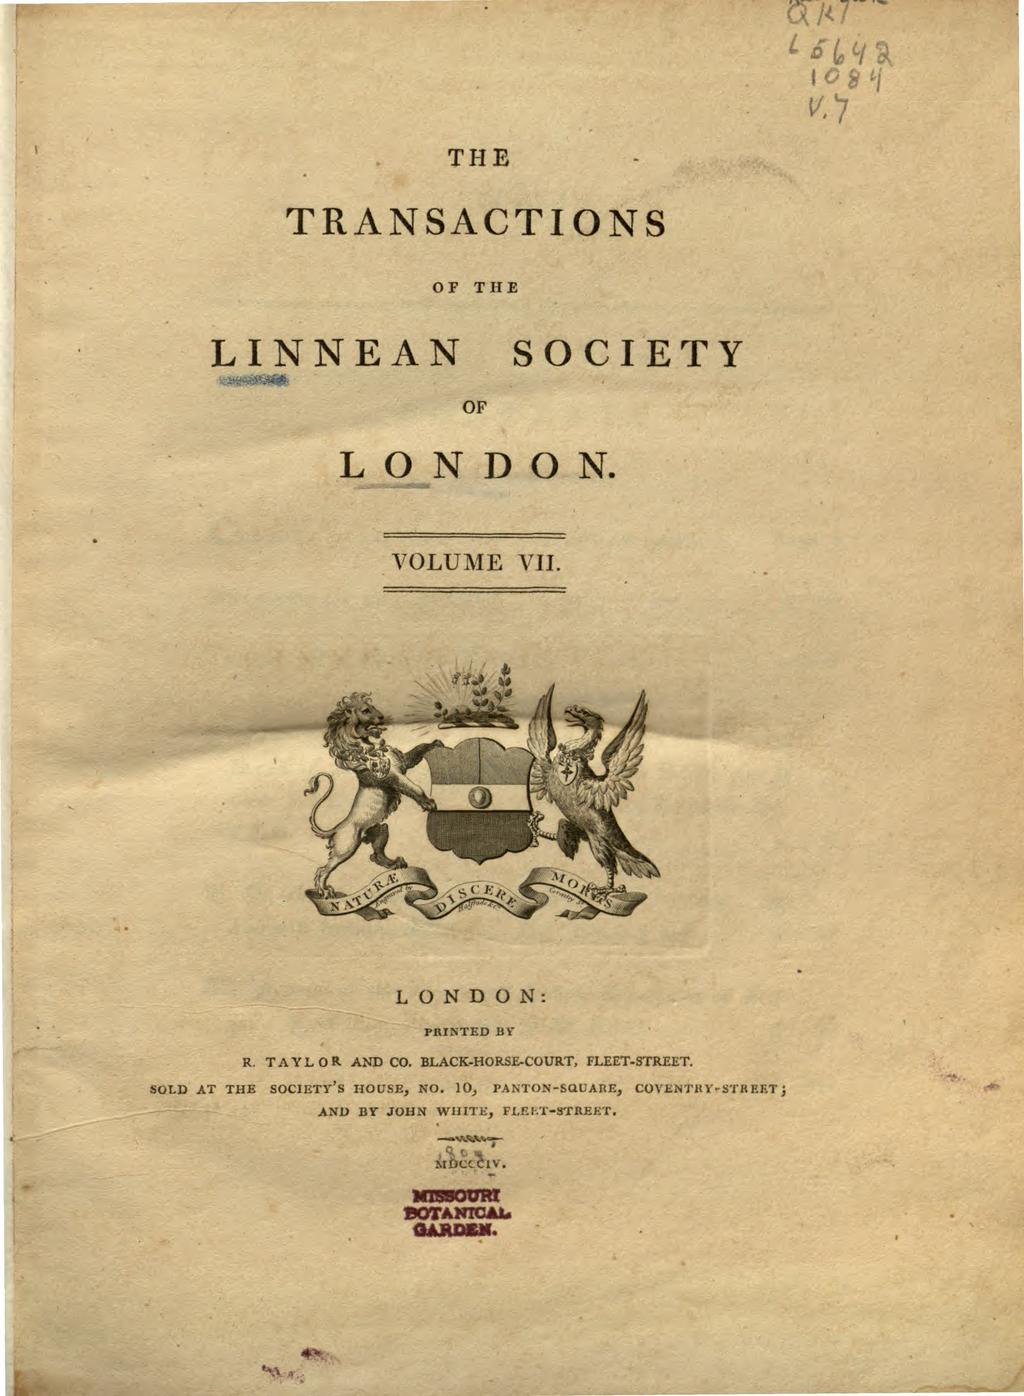 V.) THE TRANSACTIONS OF THE LINNEAN SOCIETY.-: OF LONDON. VOLUME VII. LONDON: PRINTED Bi r R. TAYLOR AND CO. BLACK-HORSE-COURT, FLEET-STREET.